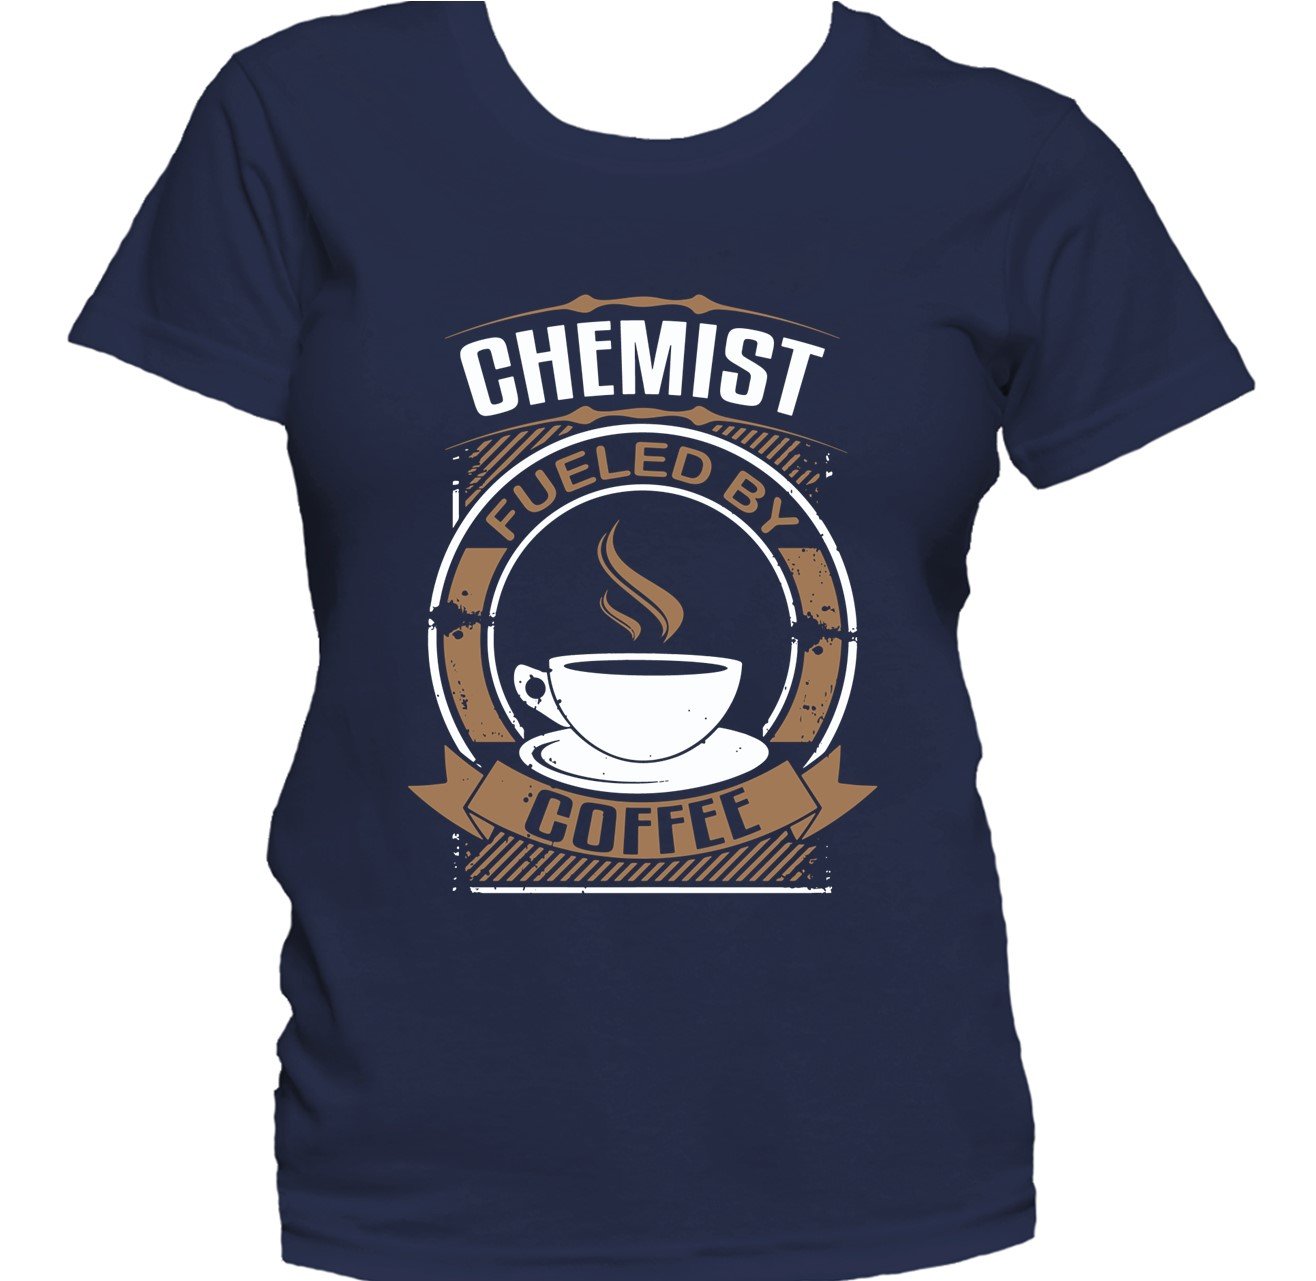 Chemist Fueled By Coffee Funny Chemistry Women's T-Shirt